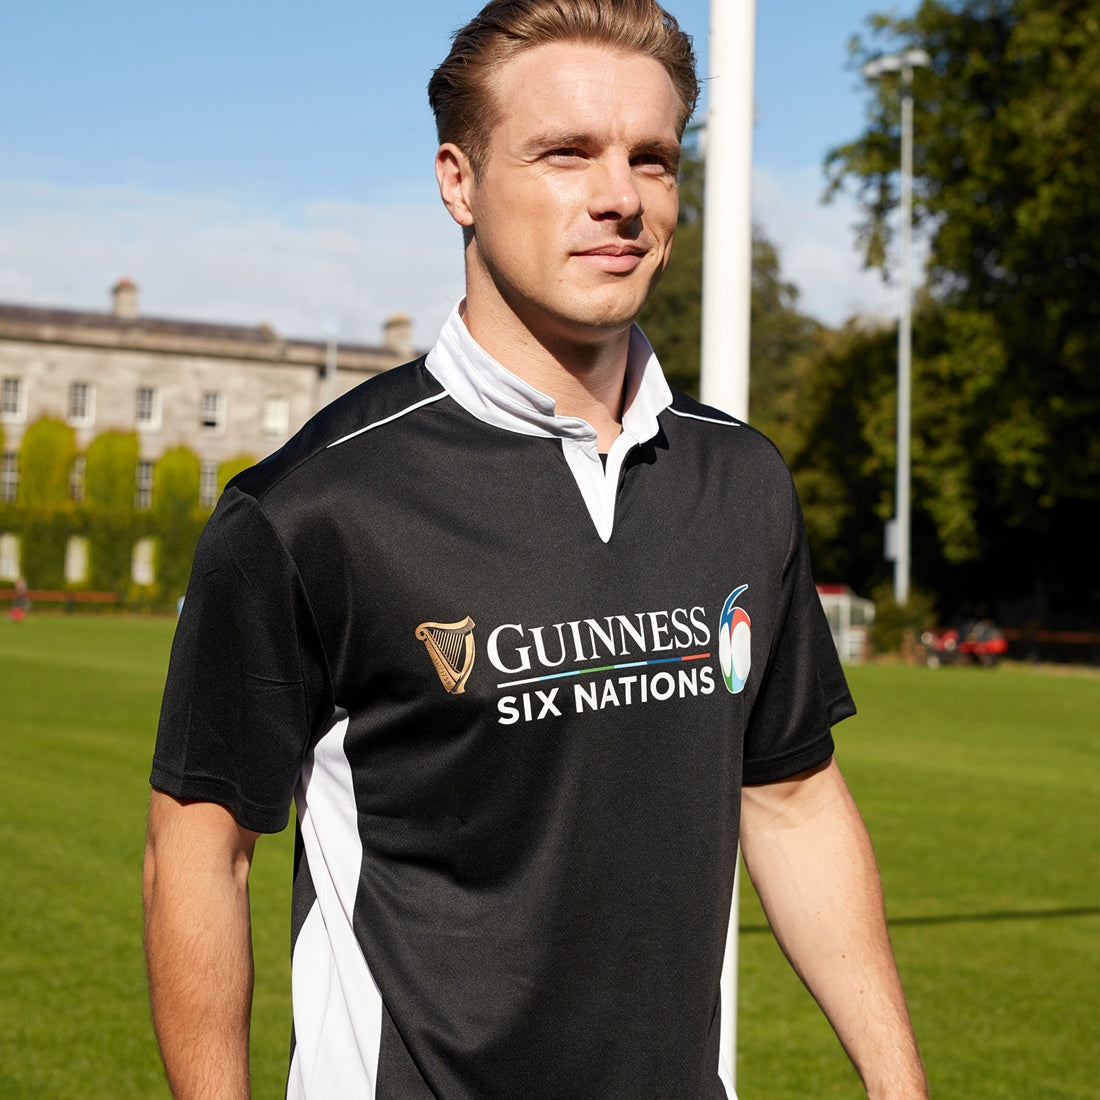 Show your support for the Six Nations as a passionate fan with the official Guinness UK Six Nations Performance Rugby Jersey.